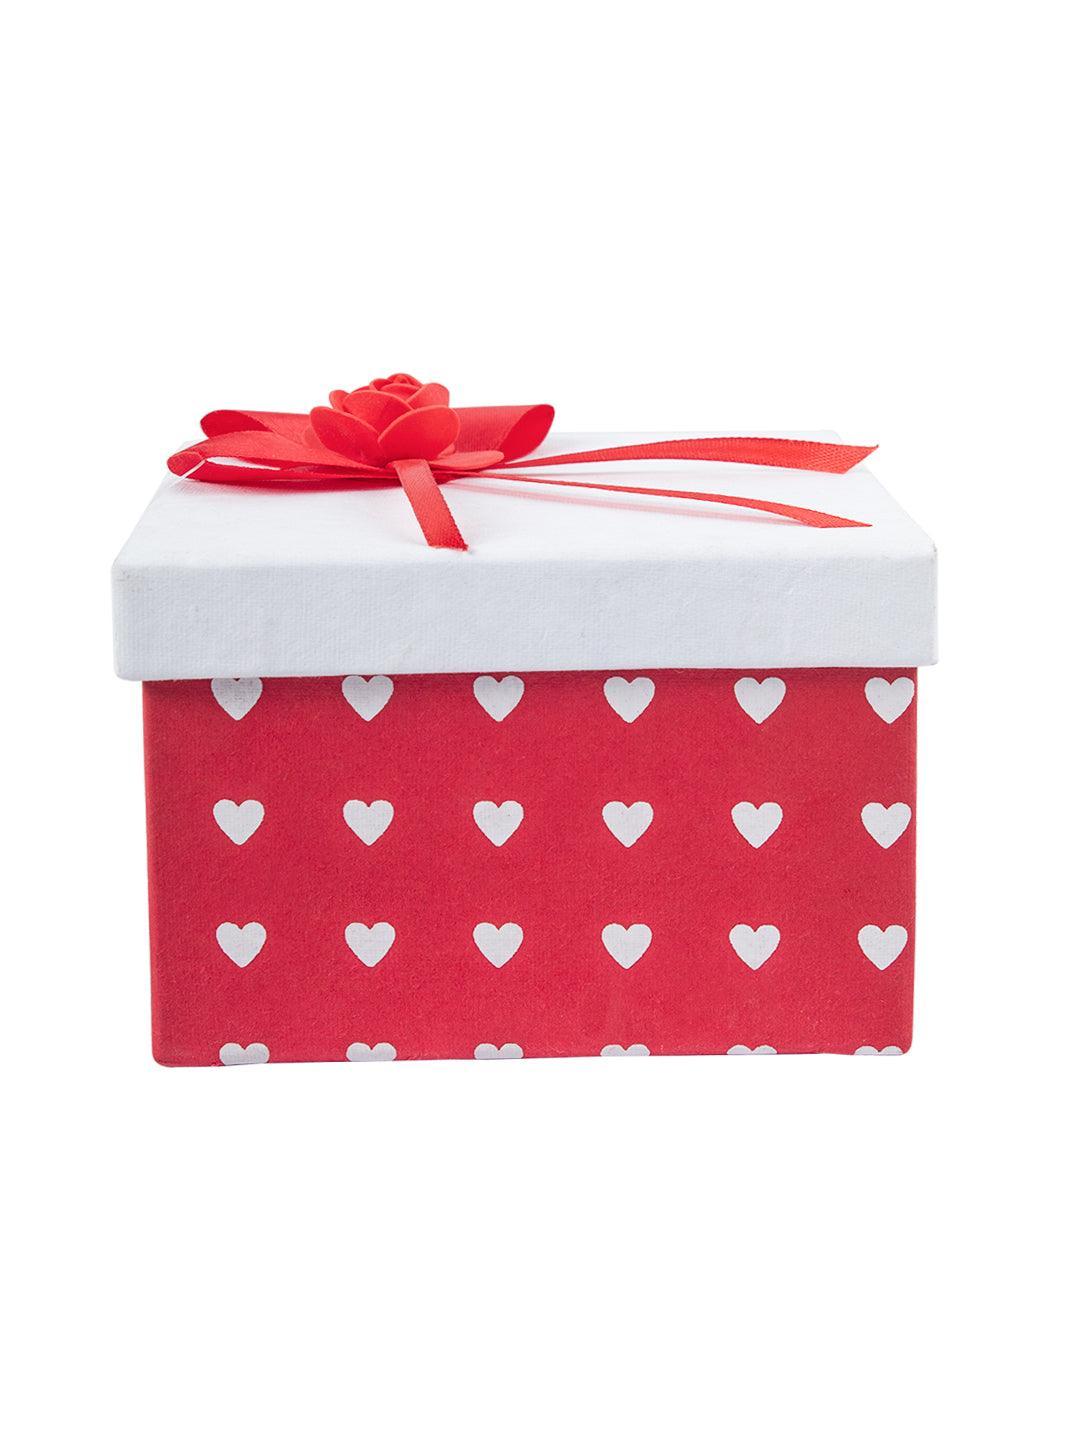 5 Valentine's Day Gifts to Express Your Love - Sweetish House Mafia